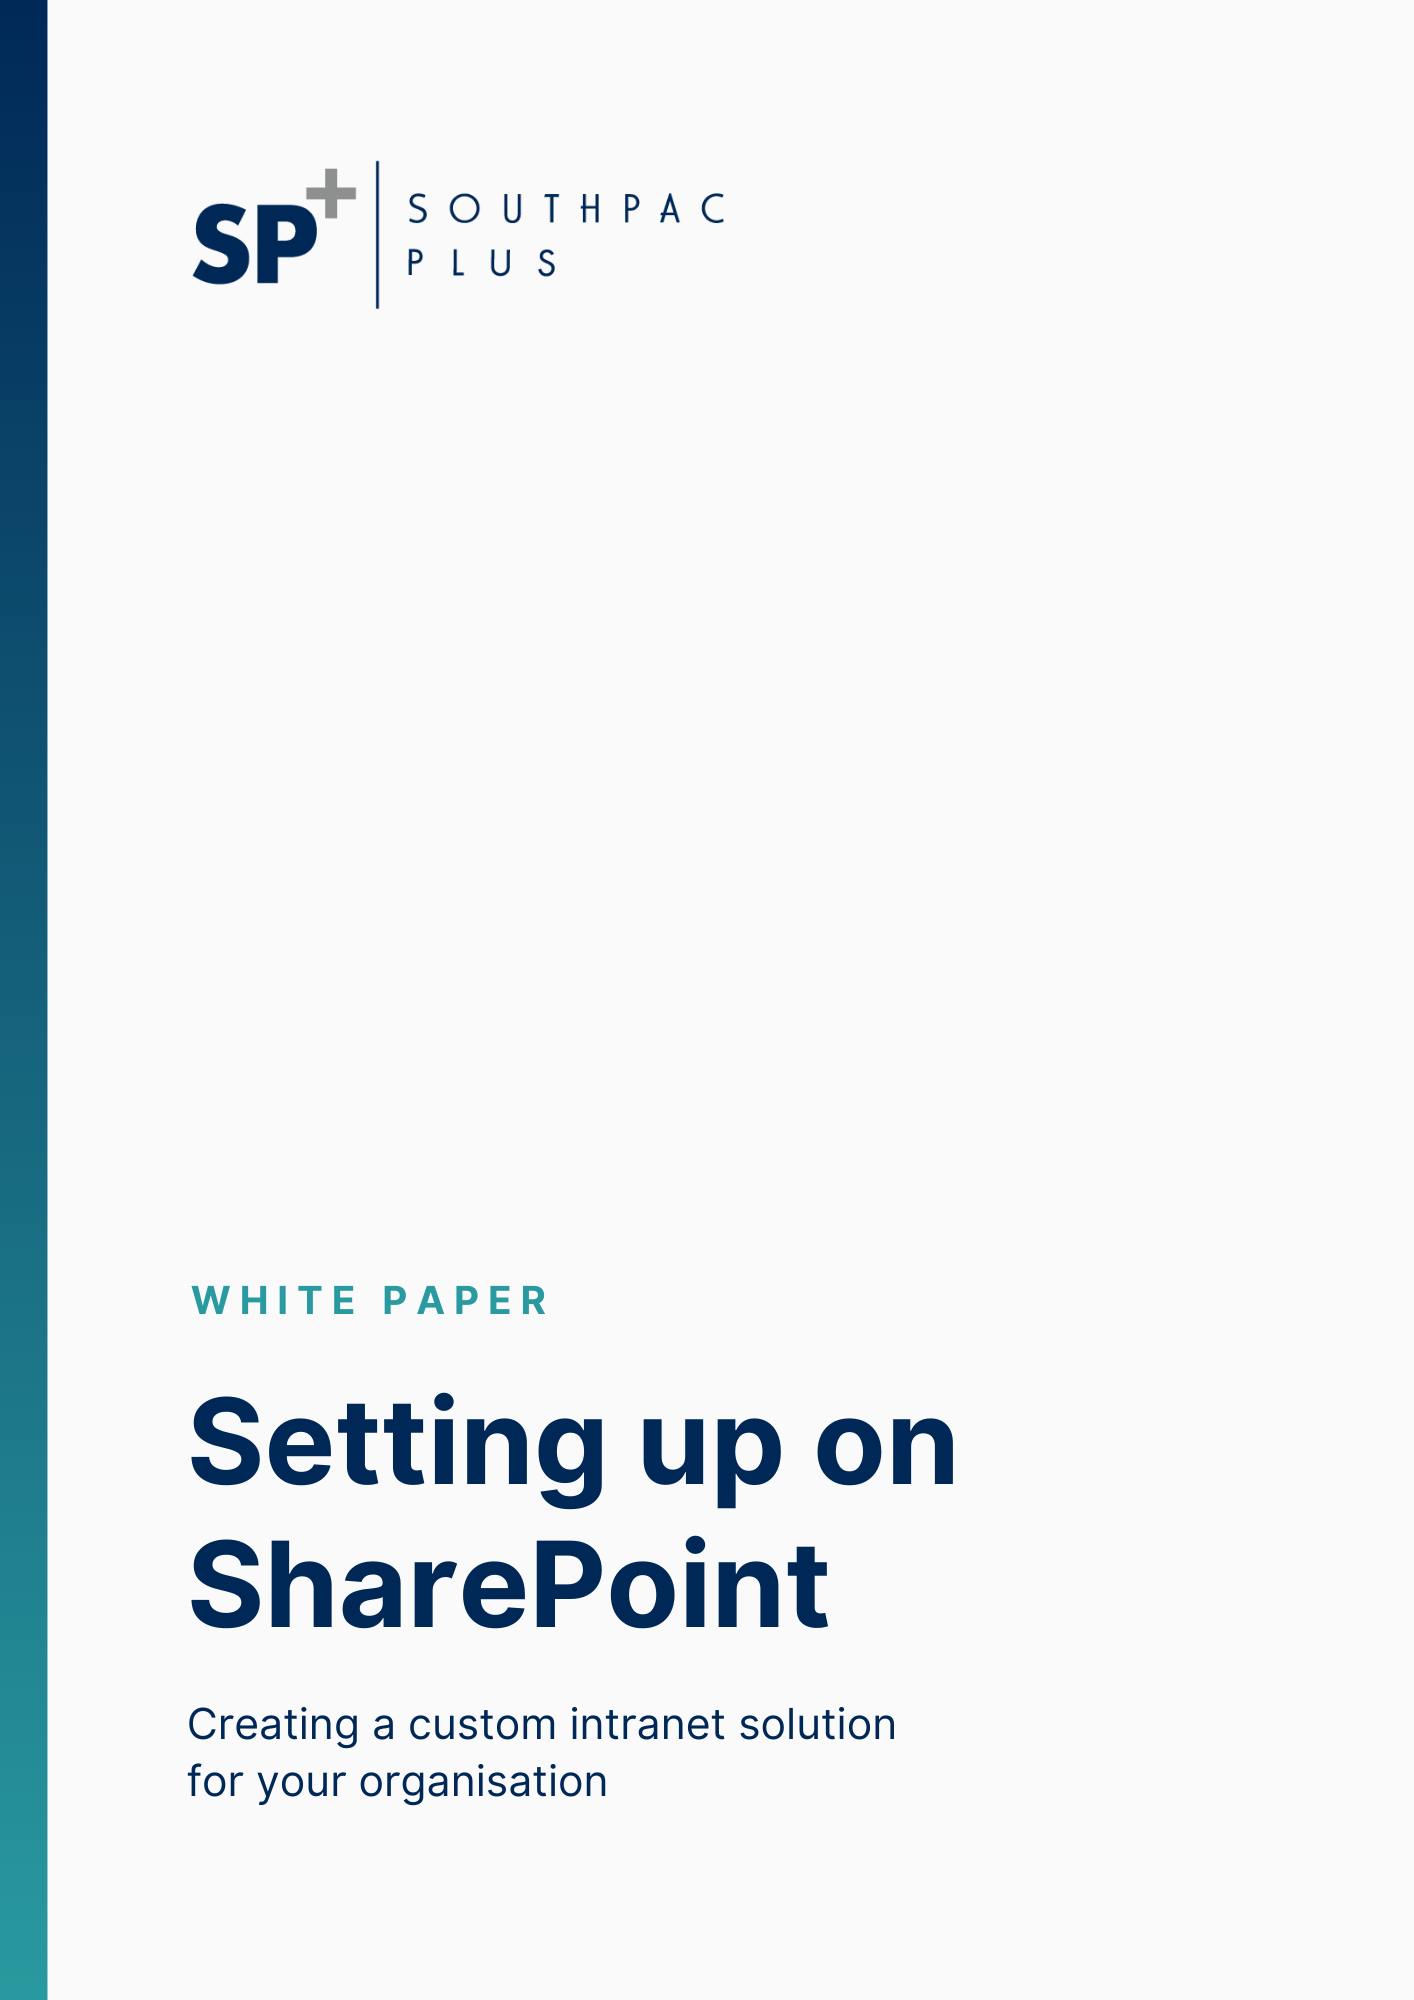 Southpac Plus' White paper on how to set up SharePoint to create a custom intranet solution for organisations.